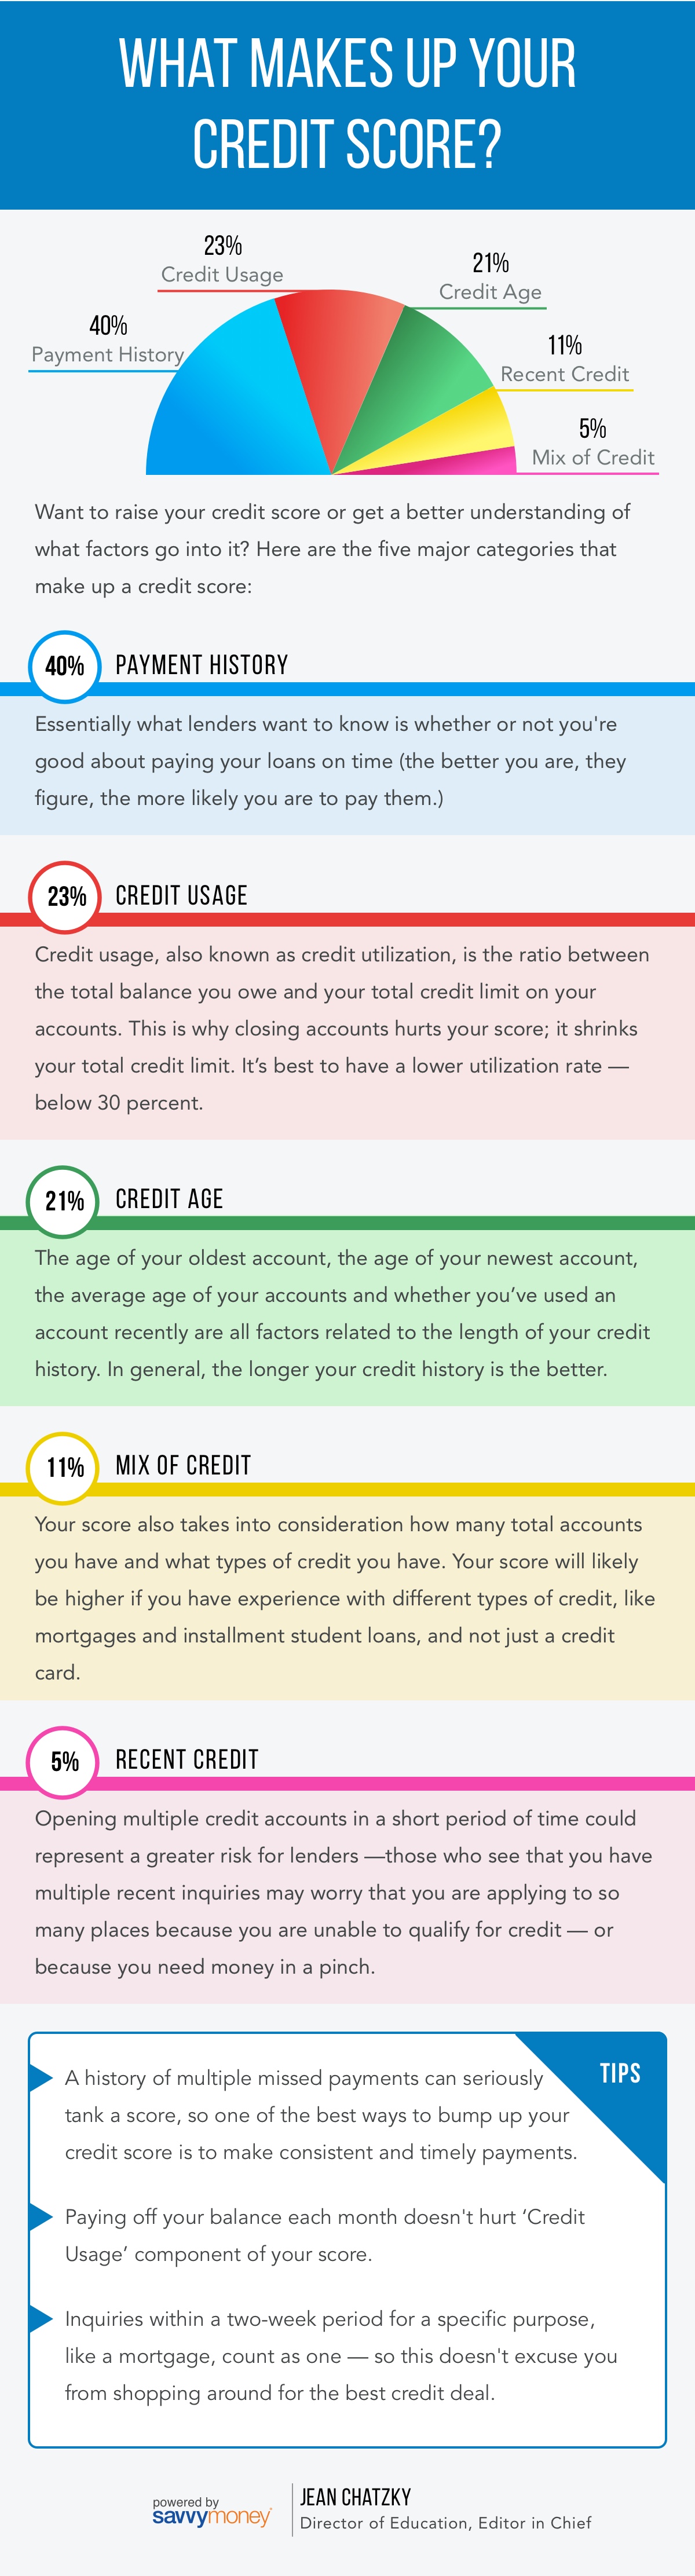 What Makes Up Your Credit Score infographic image